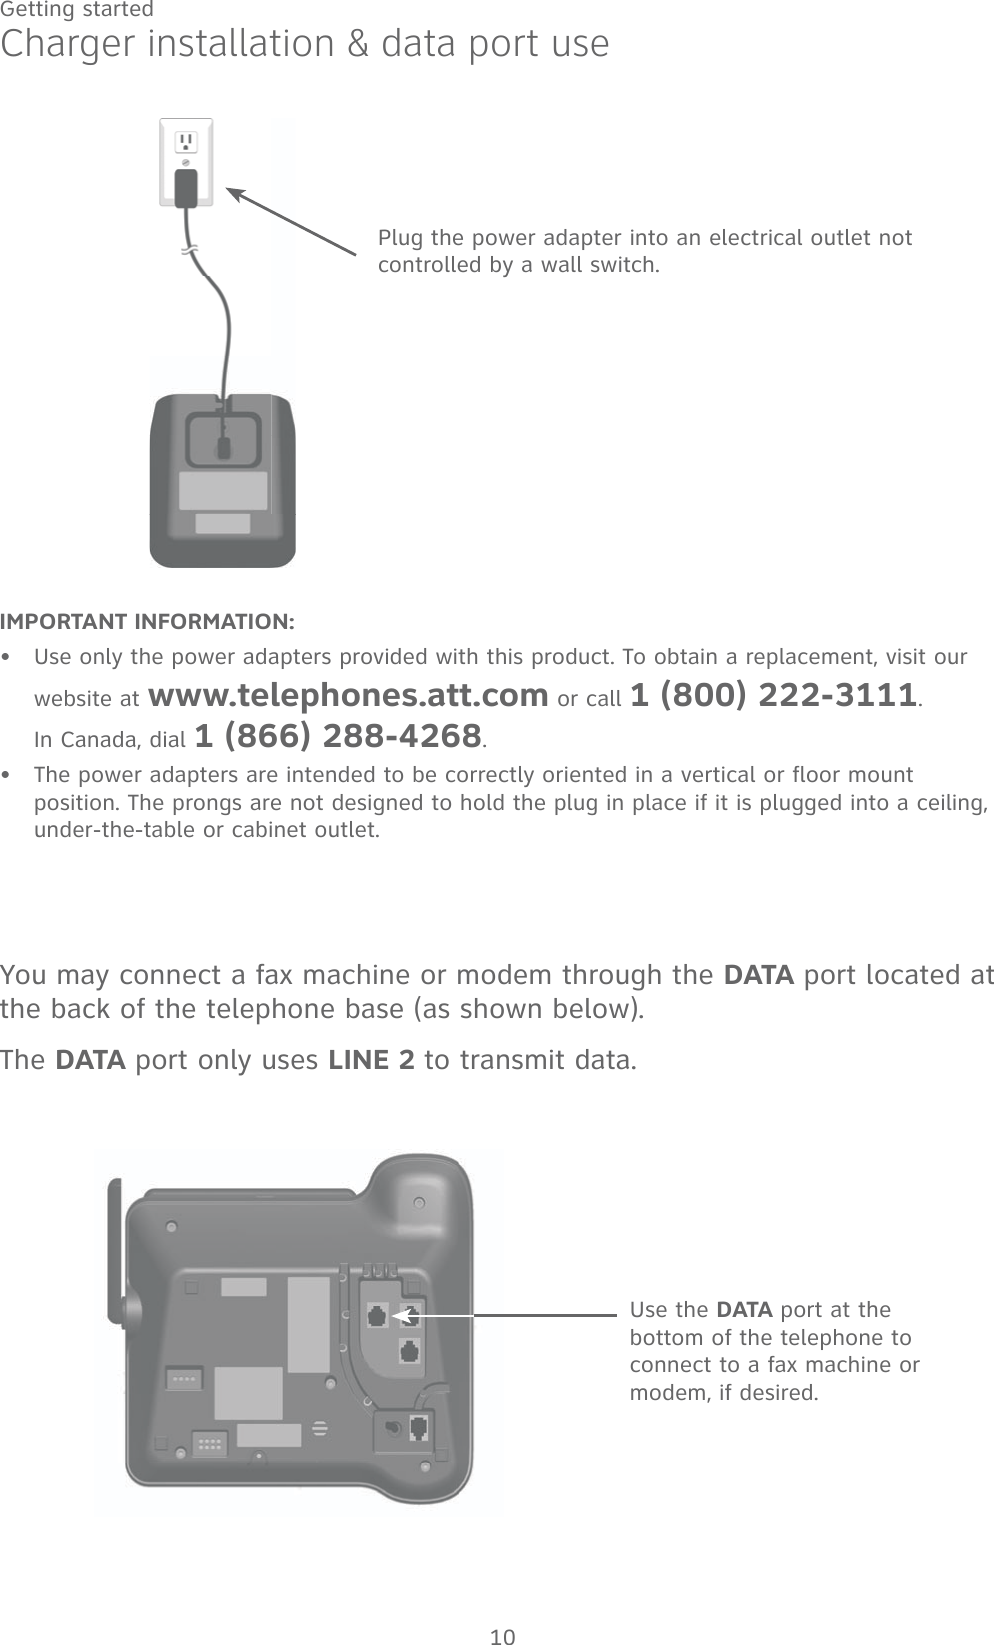 10Getting startedIMPORTANT INFORMATION:Use only the power adapters provided with this product. To obtain a replacement, visit our website at www.telephones.att.com or call 1 (800) 222-3111.  In Canada, dial 1 (866) 288-4268.The power adapters are intended to be correctly oriented in a vertical or floor mount position. The prongs are not designed to hold the plug in place if it is plugged into a ceiling, under-the-table or cabinet outlet.••Charger installation &amp; data port usePlug the power adapter into an electrical outlet not controlled by a wall switch.Use the DATA port at the bottom of the telephone to connect to a fax machine or modem, if desired.You may connect a fax machine or modem through the DATA port located at the back of the telephone base (as shown below). The DATA port only uses LINE 2 to transmit data.